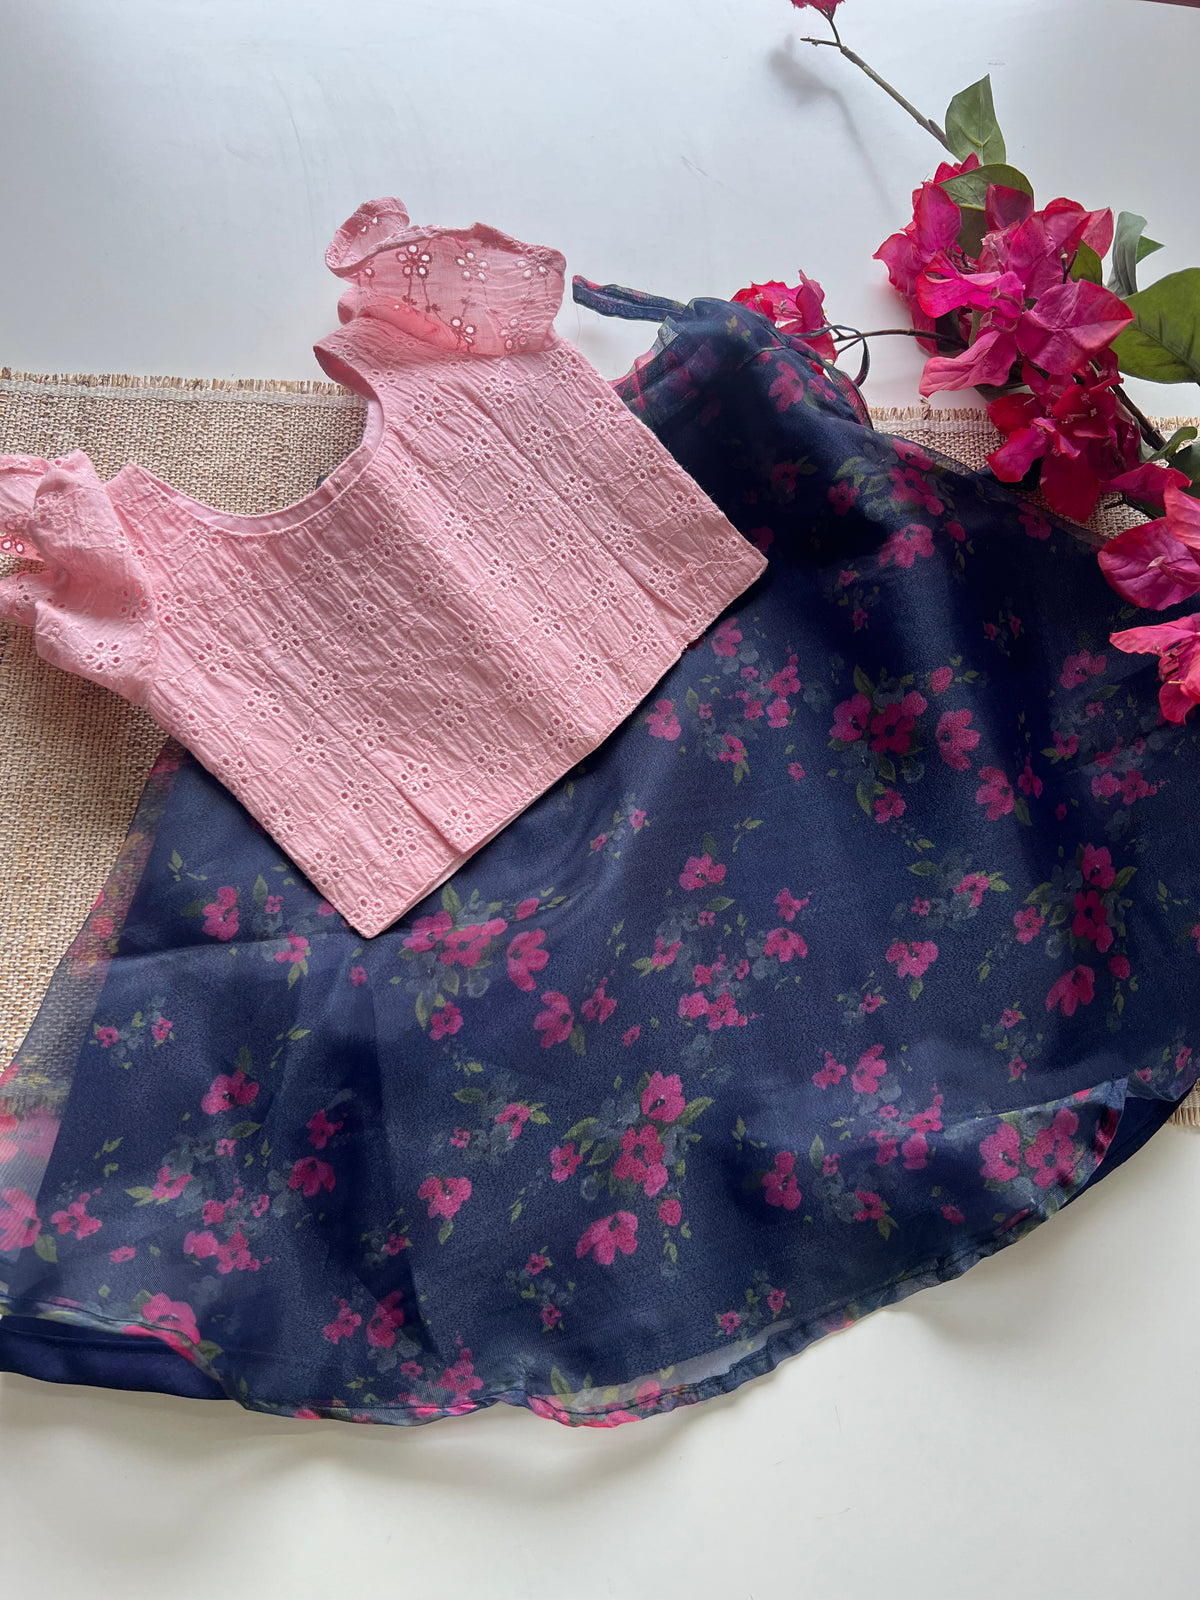 Dawdle Crop top and skirt